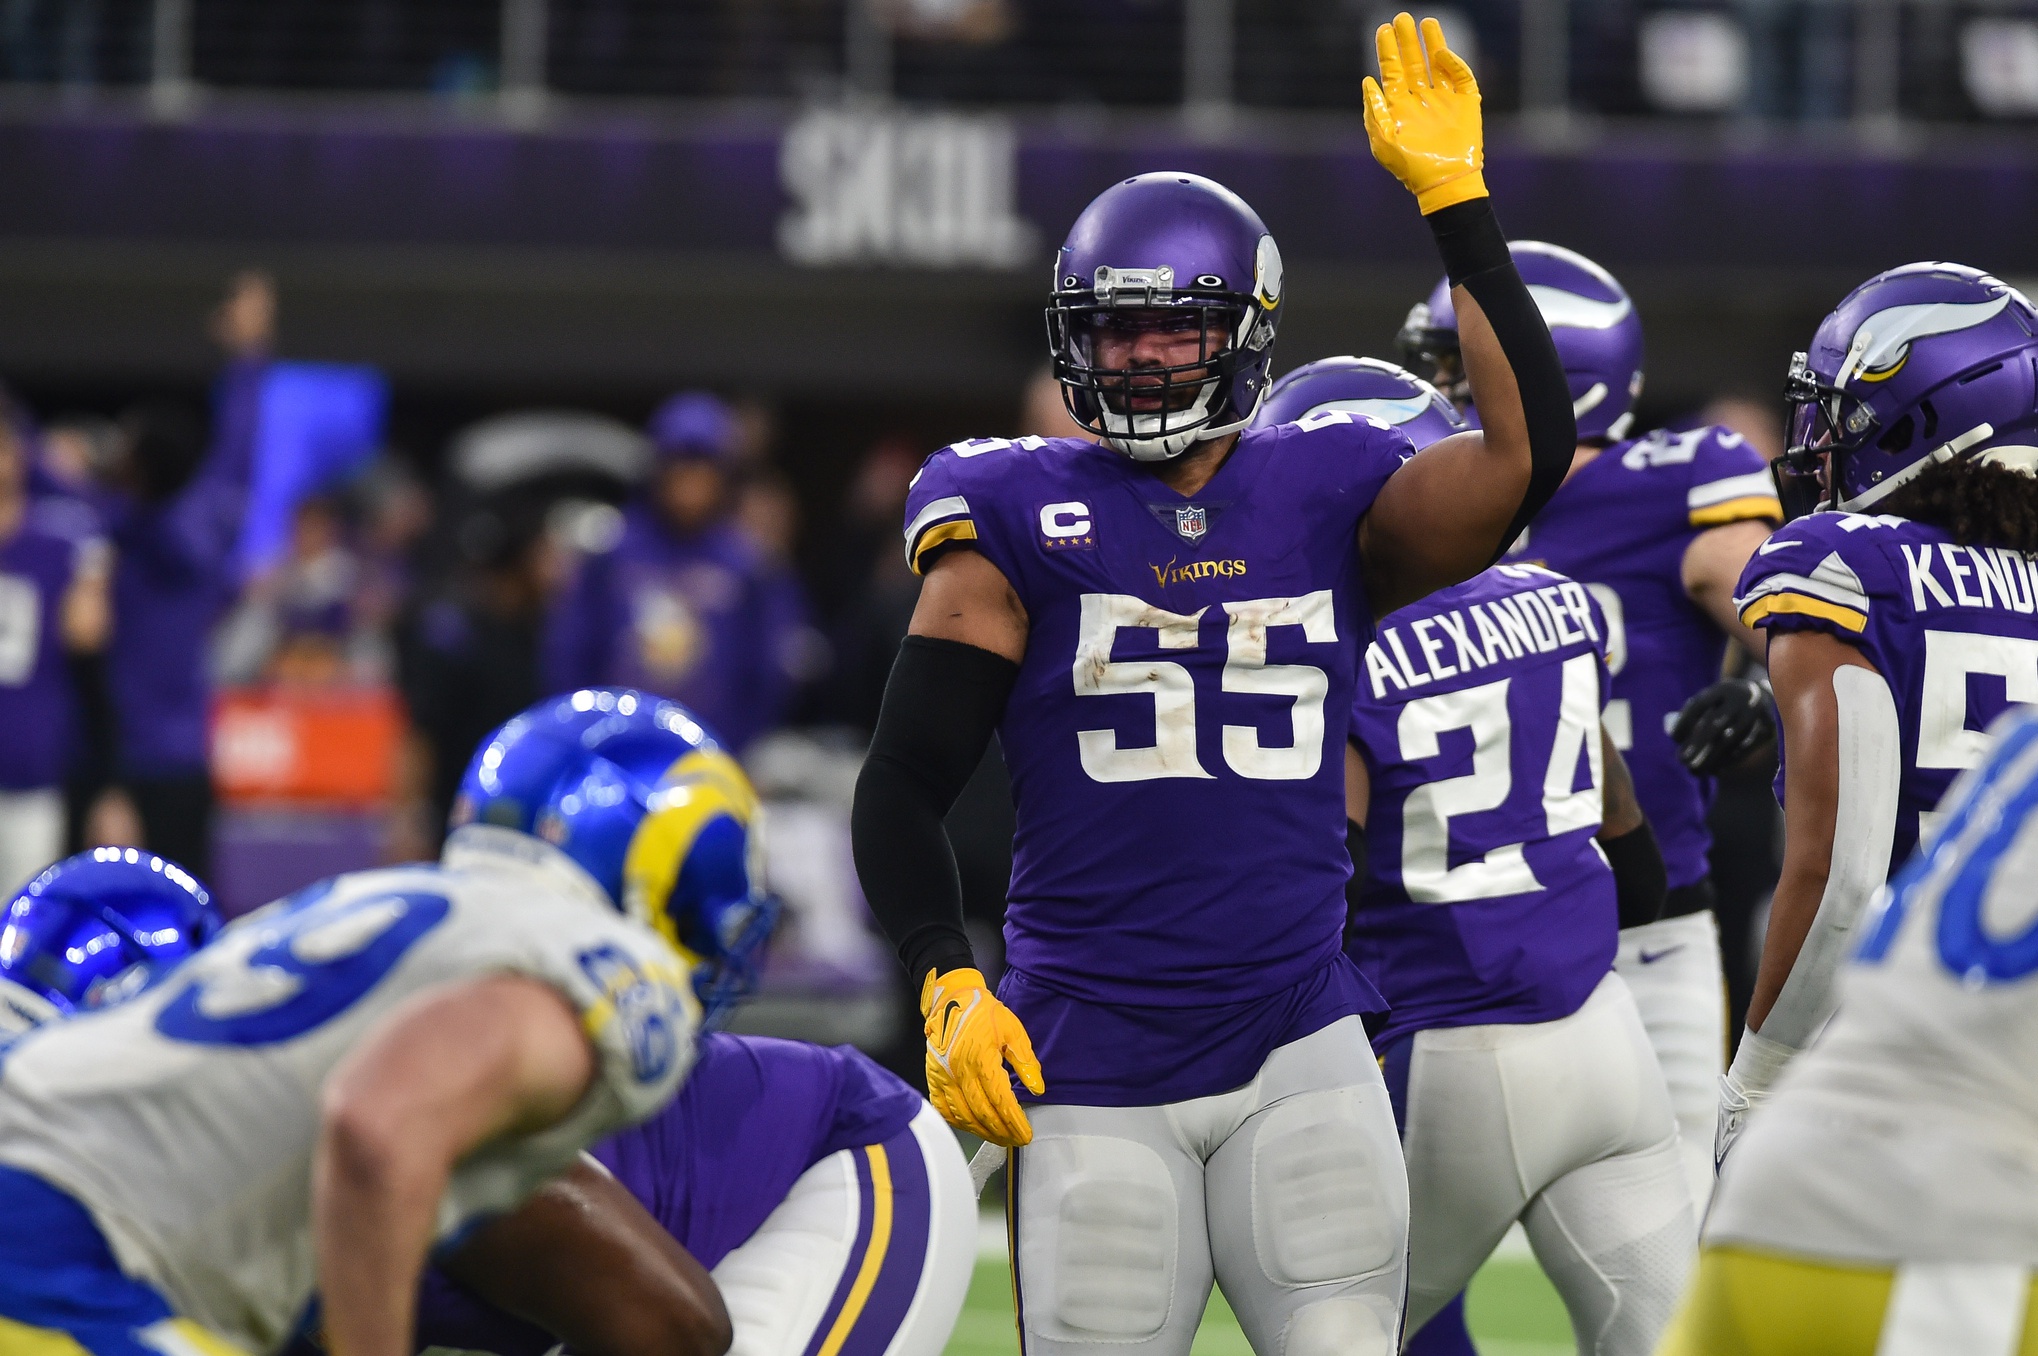 Dec 26, 2021; Minneapolis, Minnesota, USA; Minnesota Vikings outside linebacker Anthony Barr (55) directs the defense against the Los Angeles Rams during the third quarter at U.S. Bank Stadium. Mandatory Credit: Jeffrey Becker-USA TODAY Sports